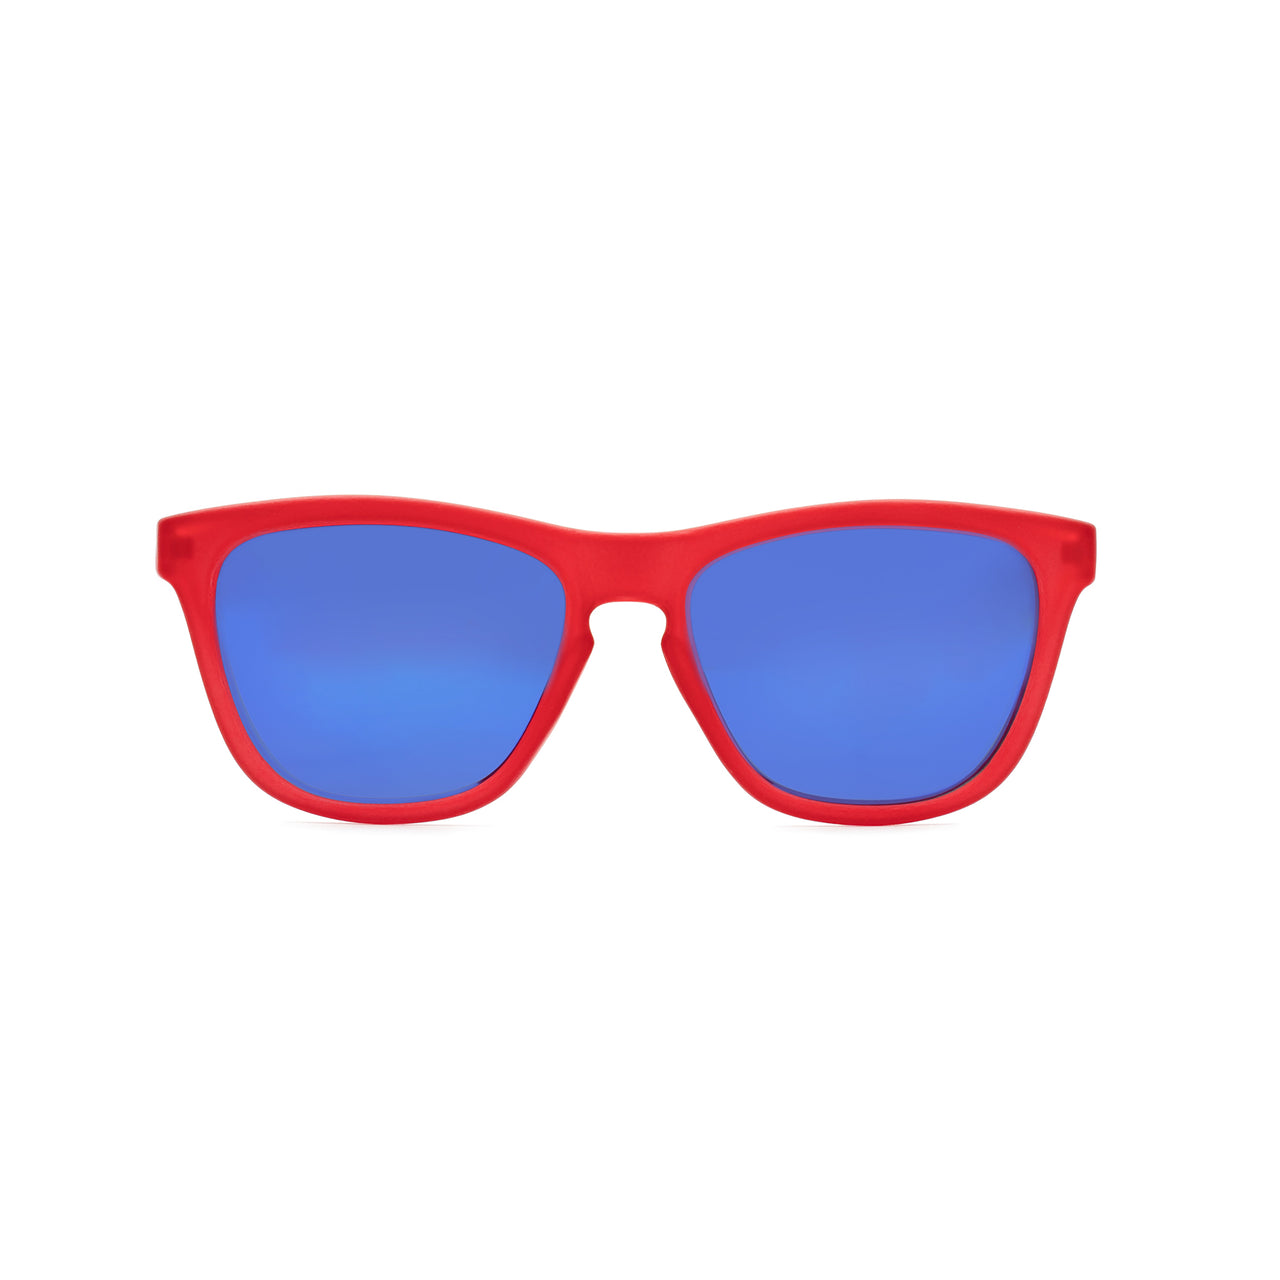 Front view of red kids sunglasses with polarized reflective blue lenses.